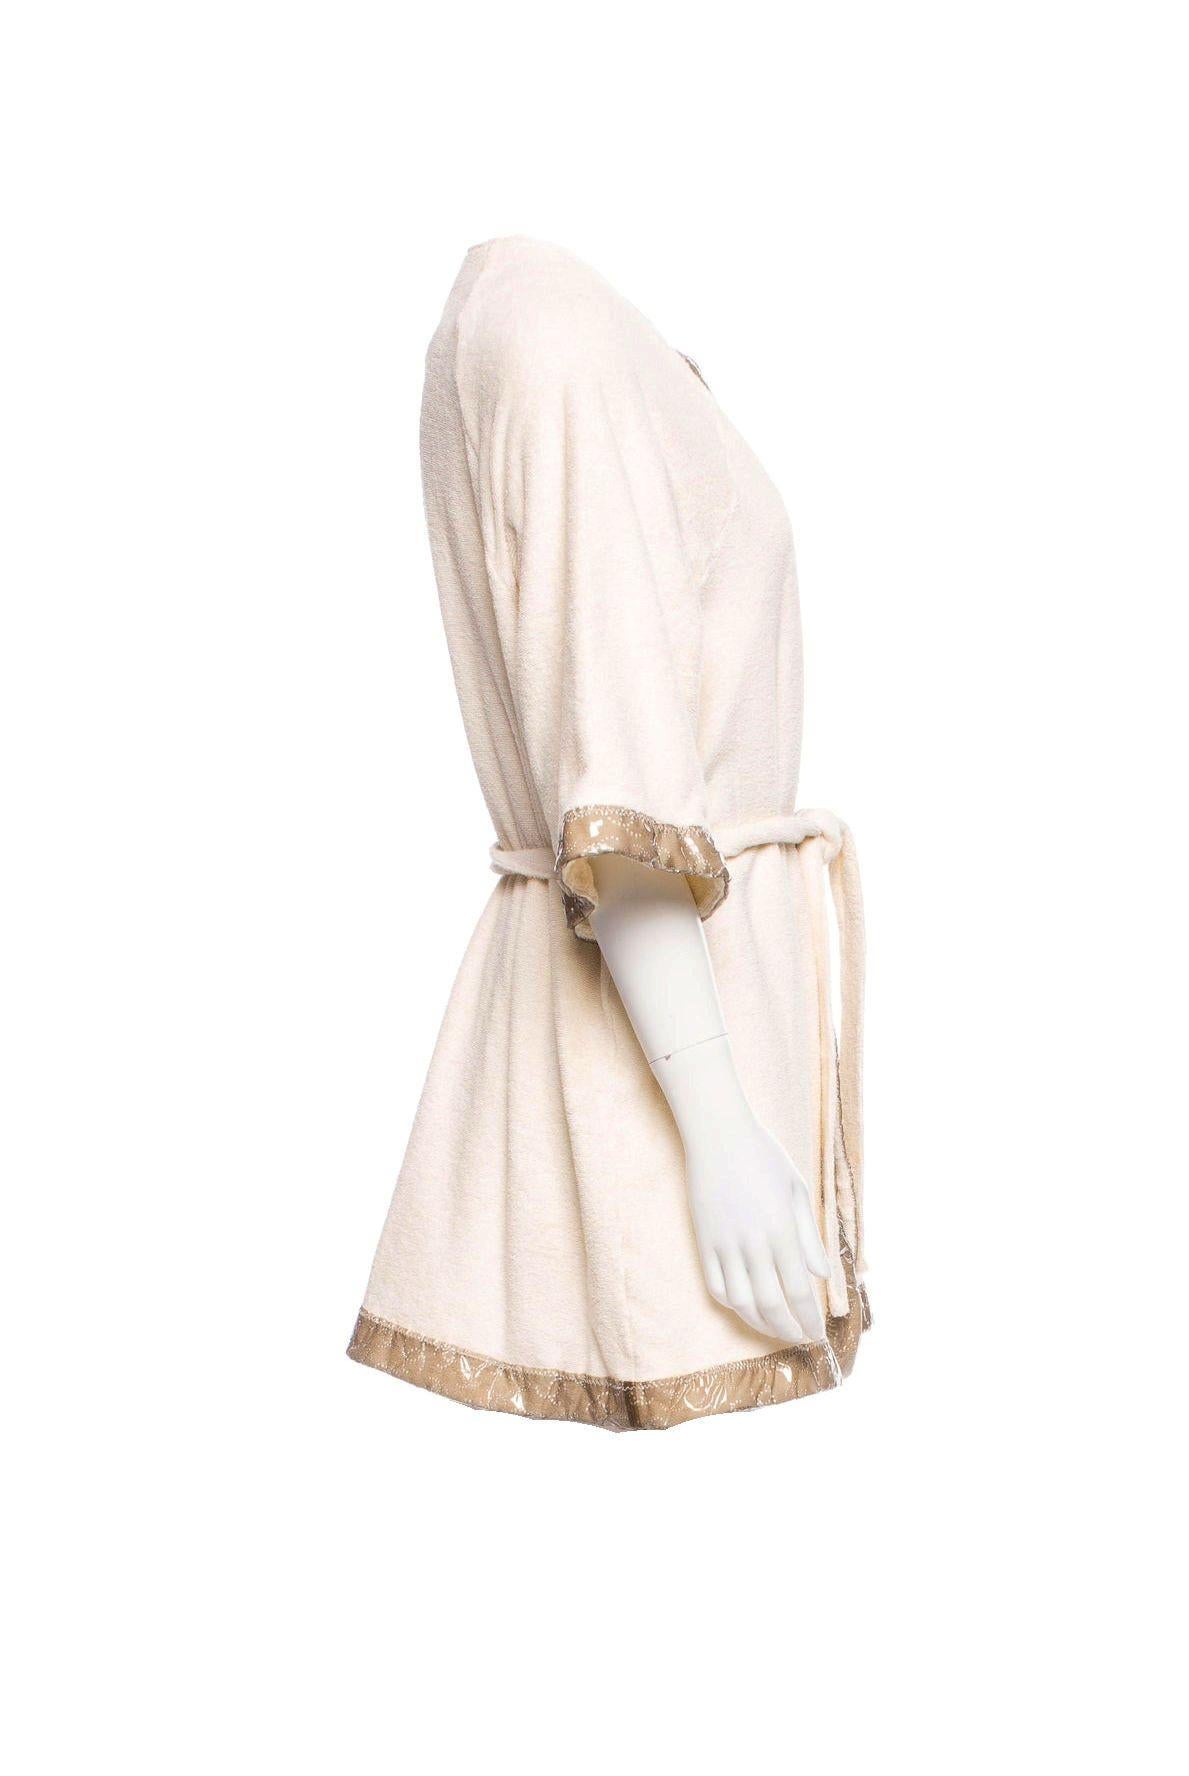 A great piece created by CHANEL
Stunning piece to wear at the pool, beach or at home
Chanel robe made of finest terrycloth
Contrast transparent trim featuring perforated interlocking CC patterns throughout 
Tie closure at waist
It has the famous CC